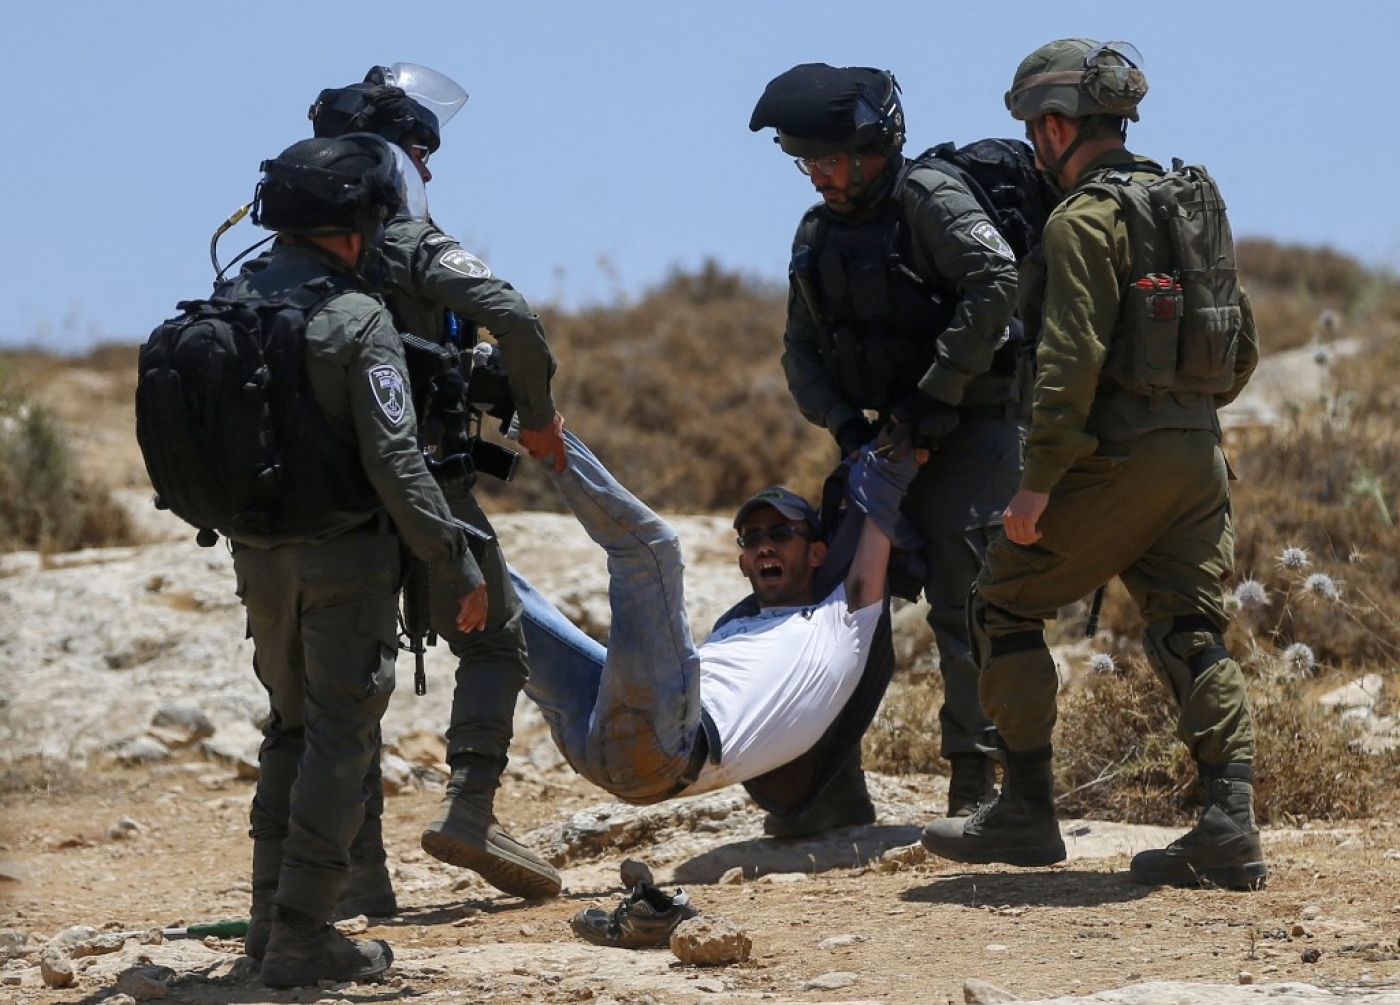 Israeli forces remove a demonstrator during a protest on 1 July 2022 in Masafer Yatta in the Israeli-occupied West Bank (AFP)